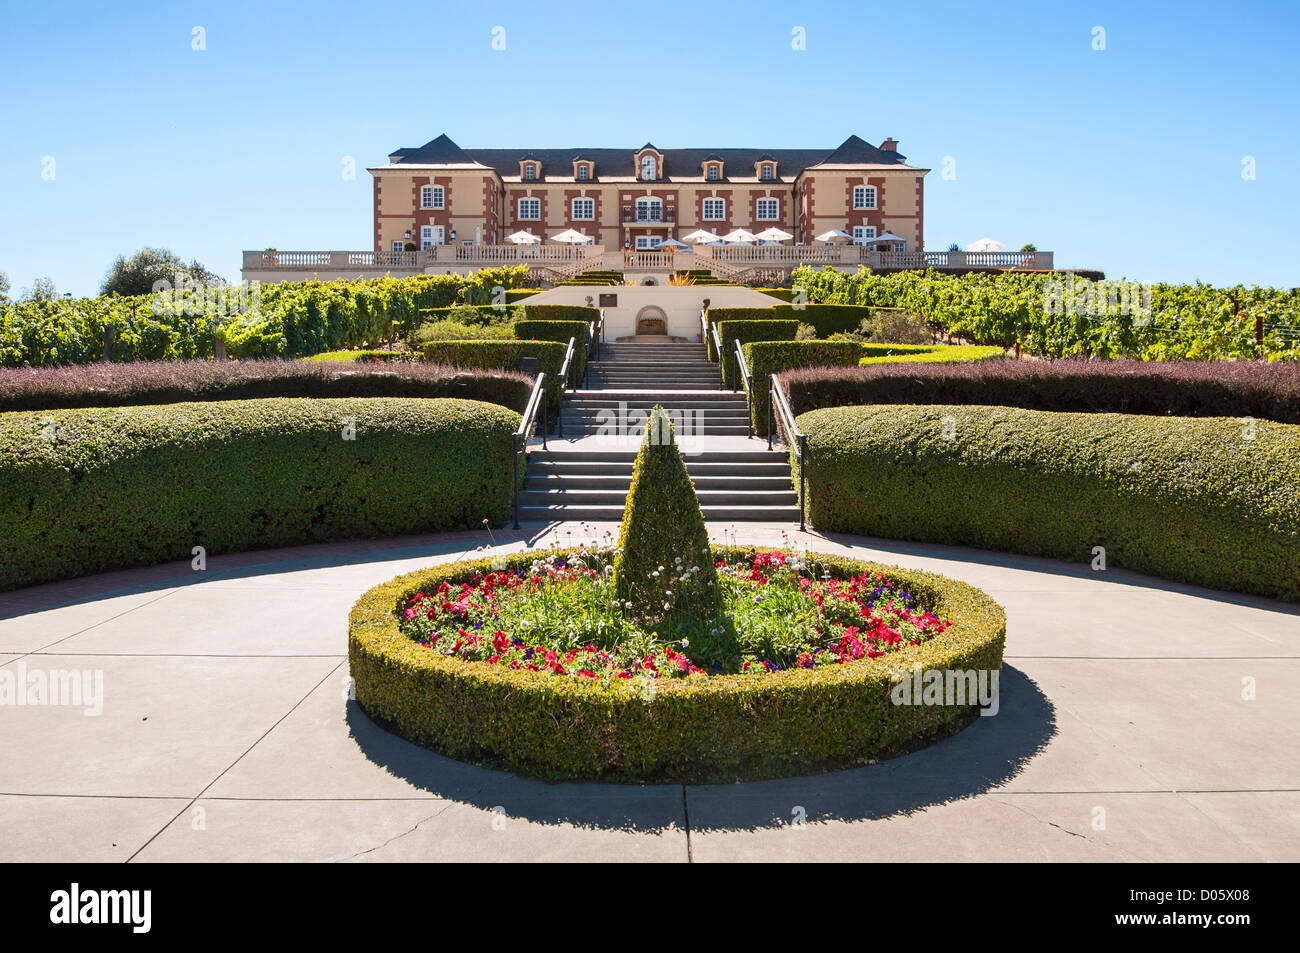 Beautiful view of the Domaine Carneros Winery and Vineyard in Napa Valley. Stock Photo